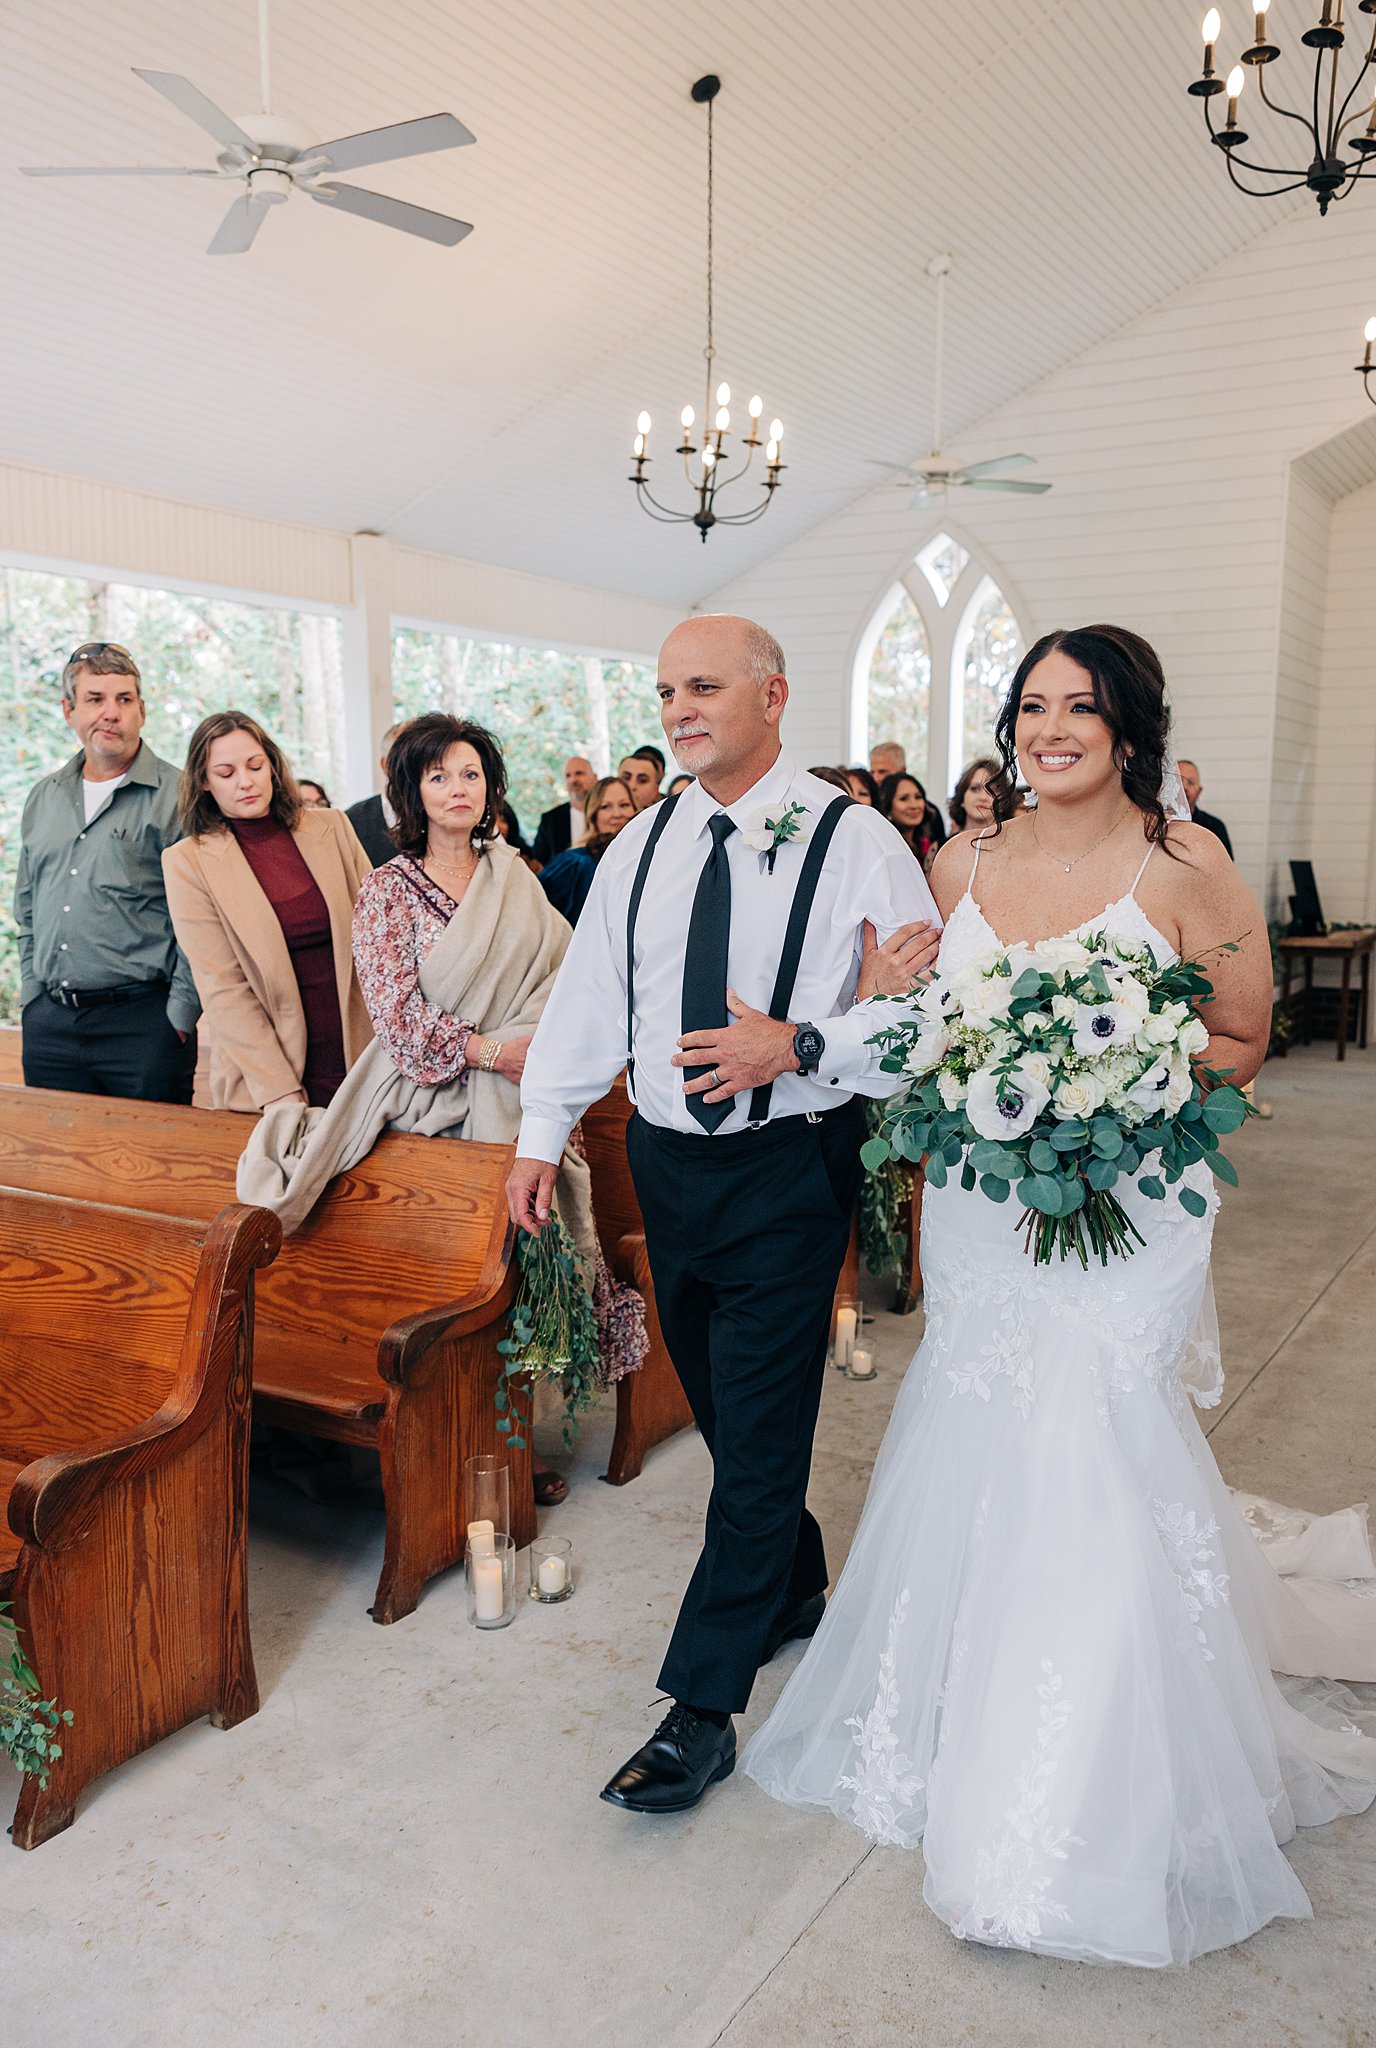 A father walks his daughter down the aisle for her wedding